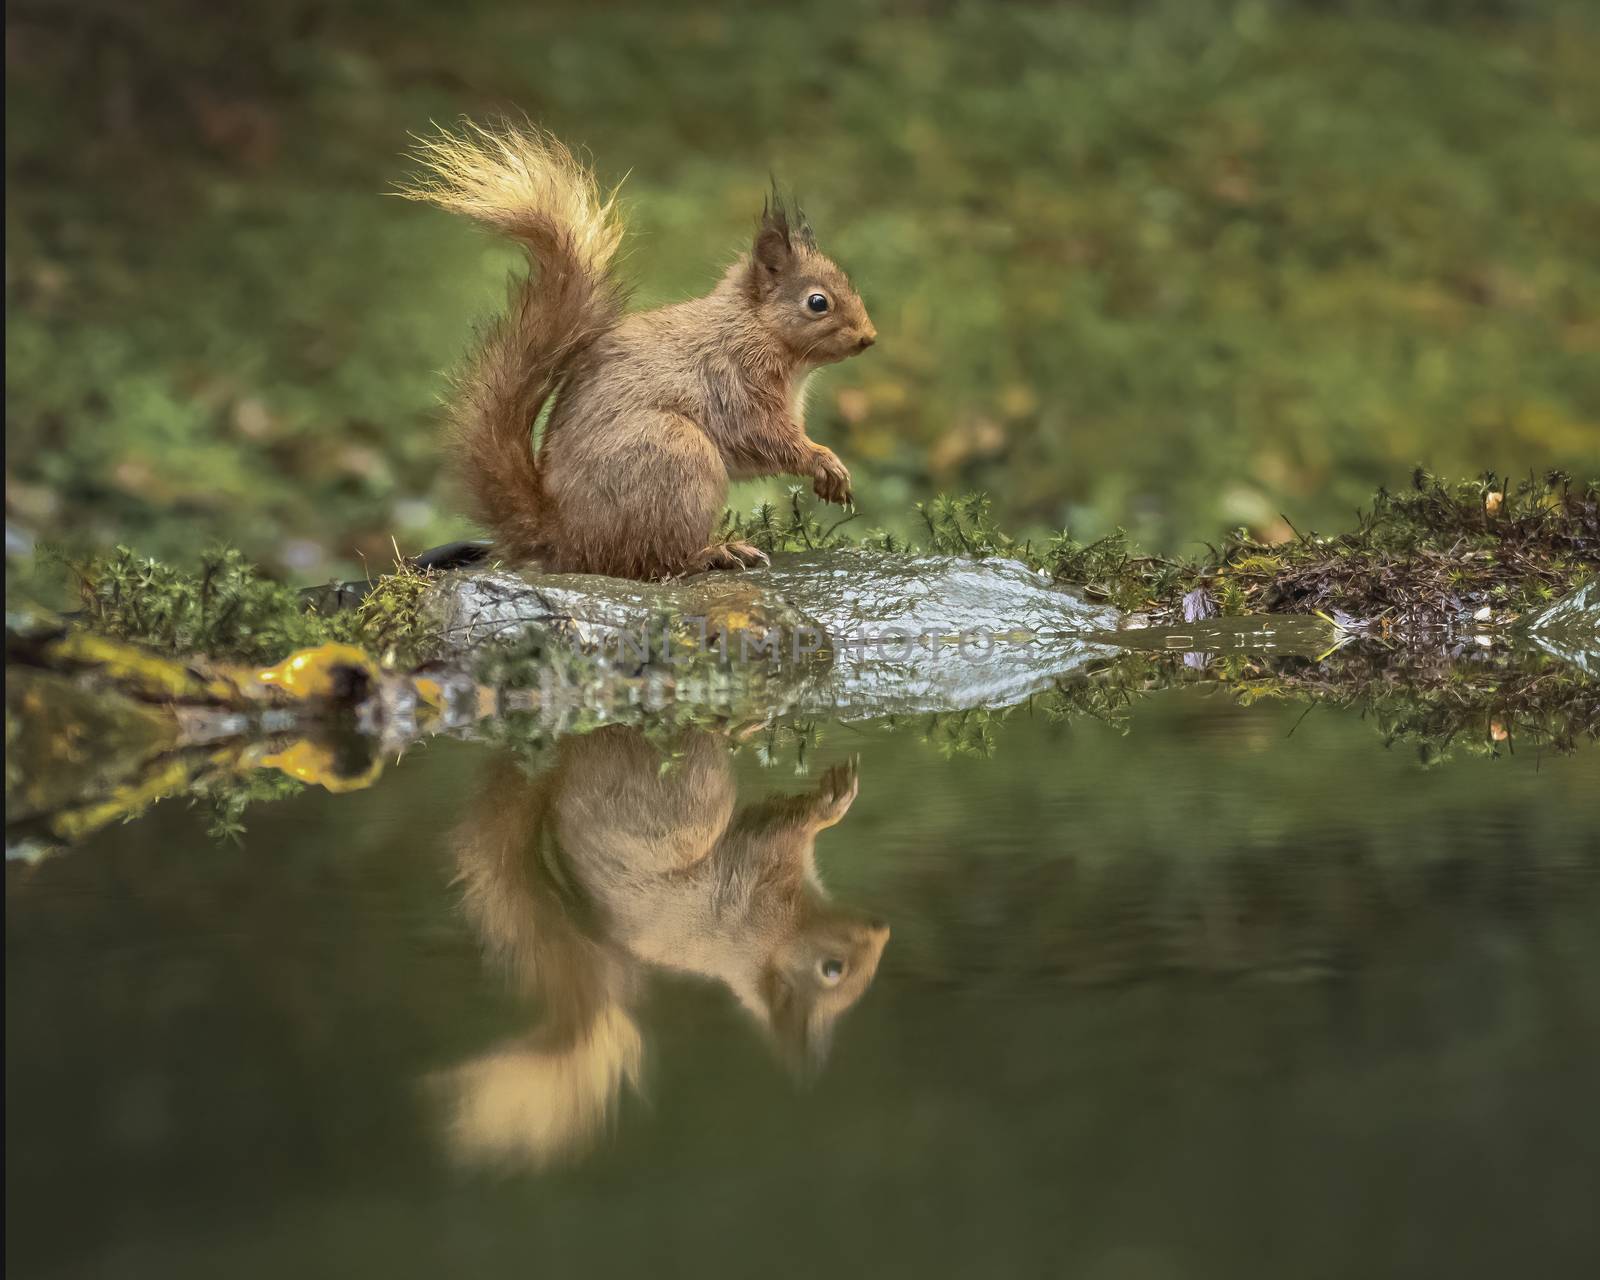 Red Squirrel sheltering under his own tail as the rain falls by mrs_vision